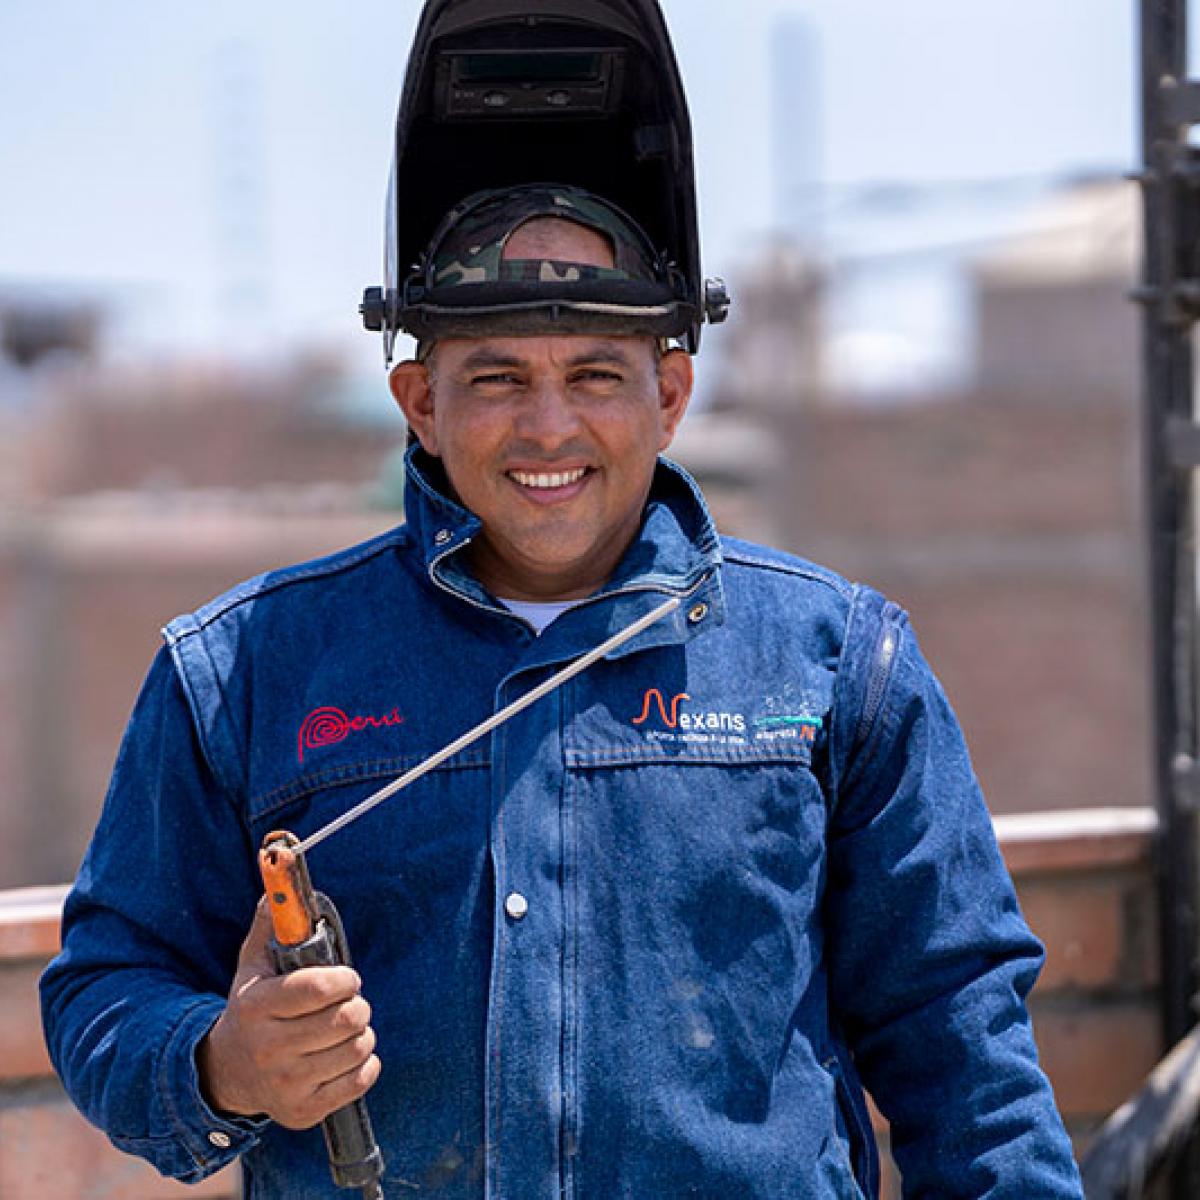 A worker man smiling and holding a welding tool